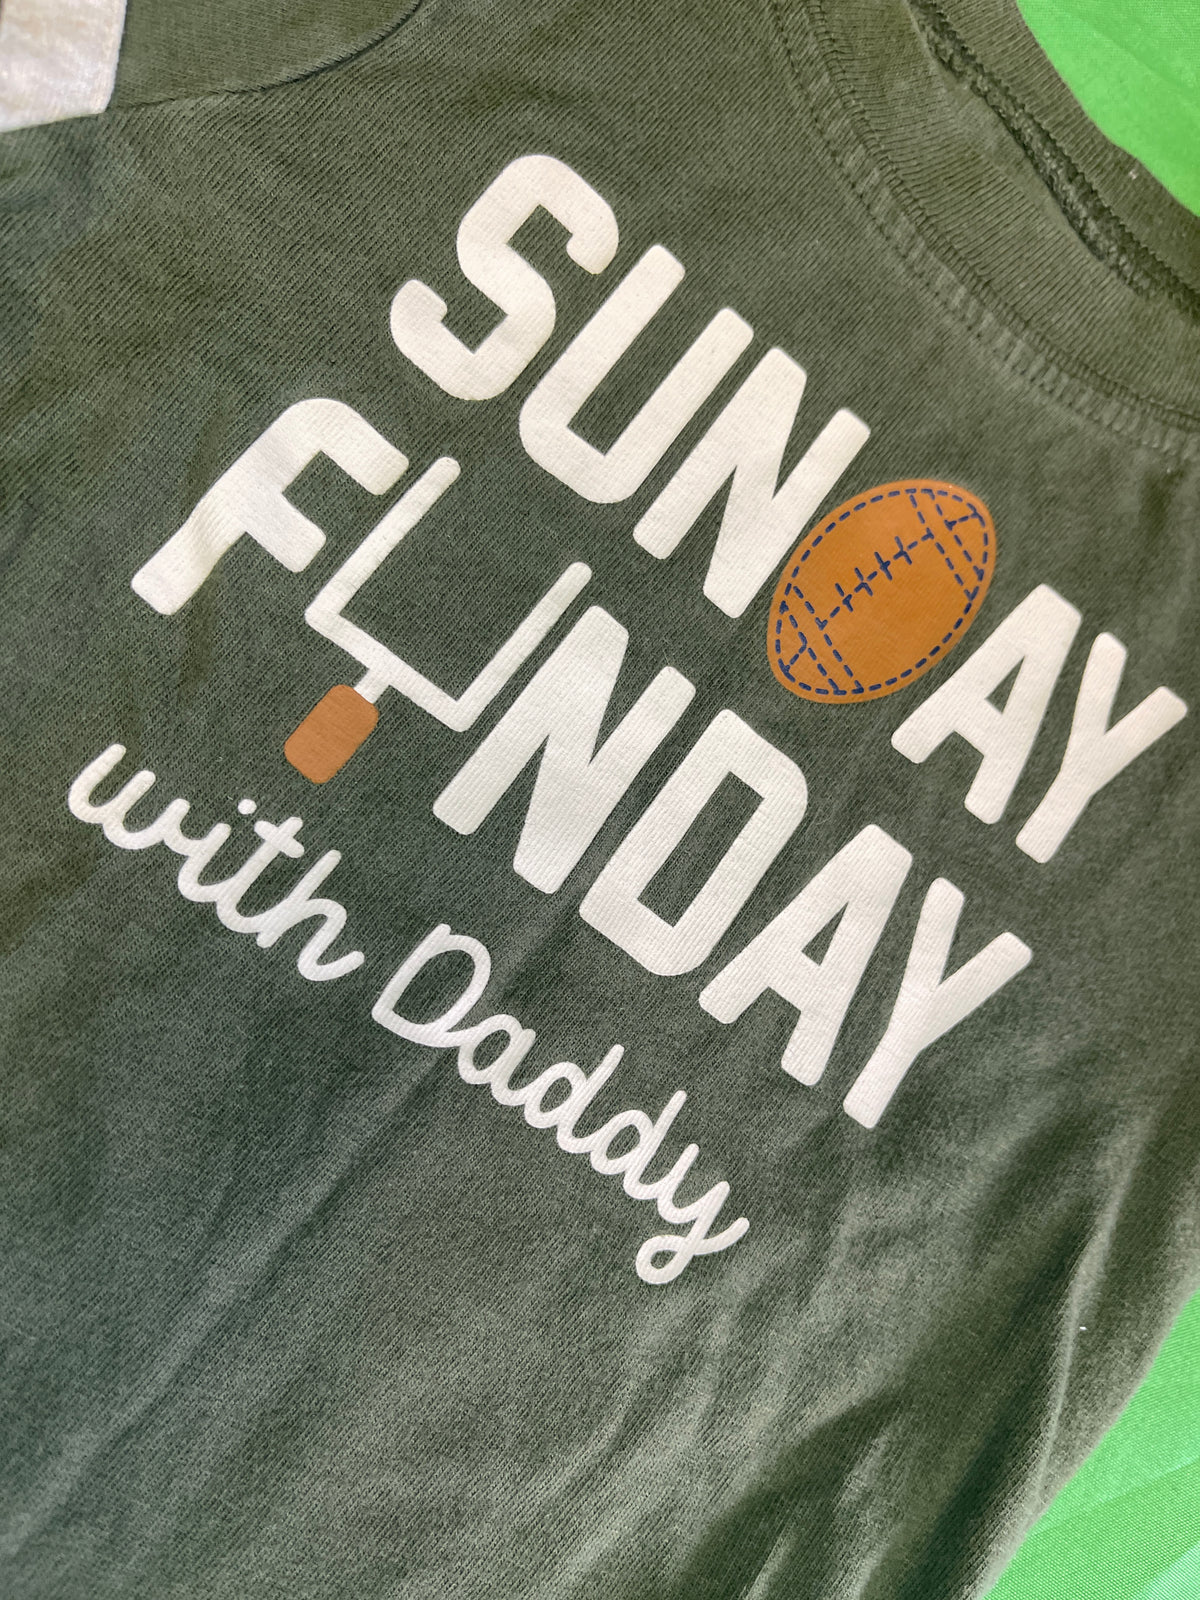 American Football "Sunday Funday with Daddy" Bodysuit/Vest Toddler 18 Months